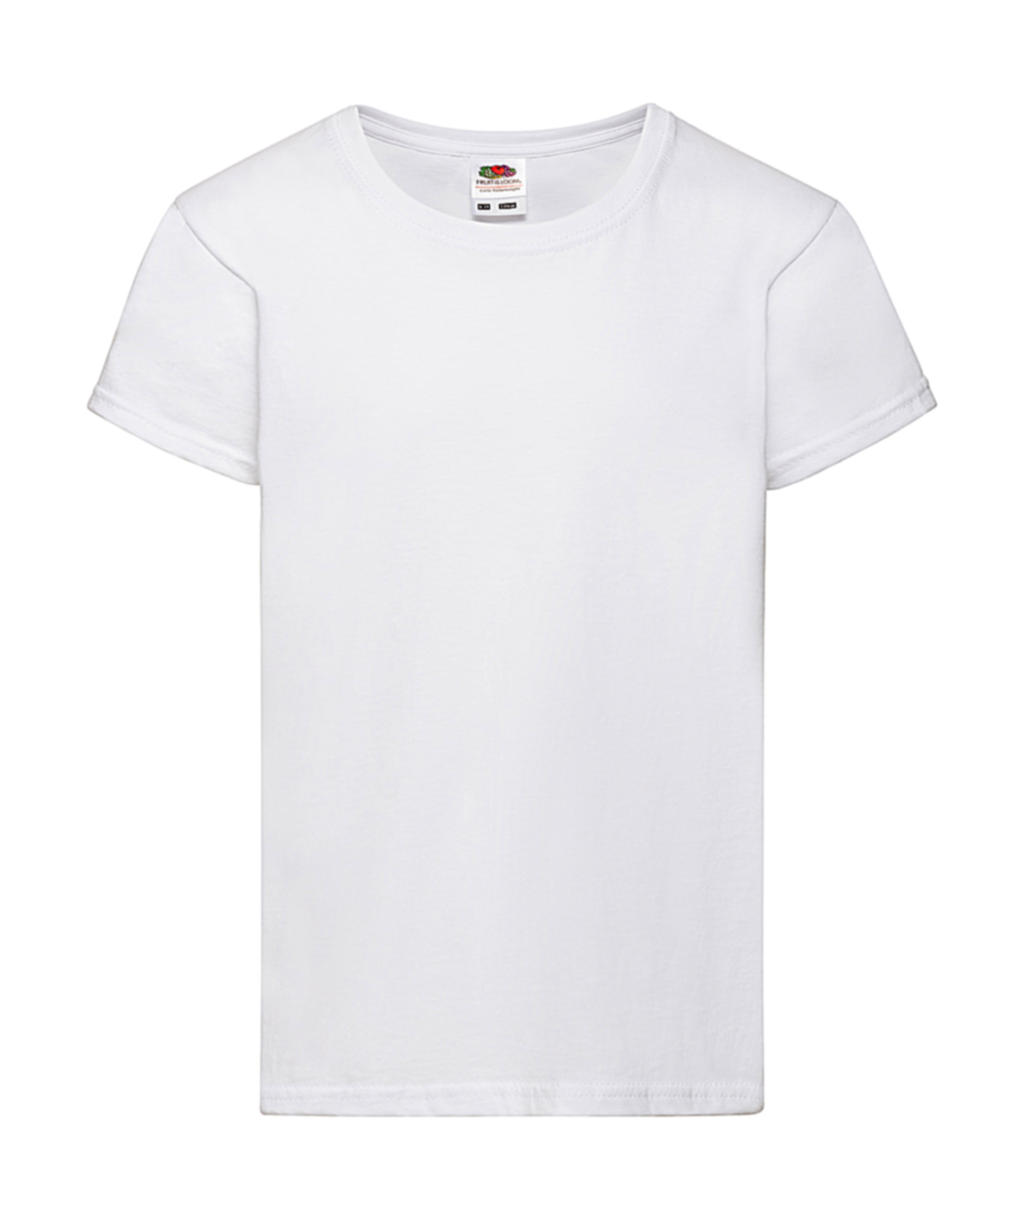  Girls Valueweight T in Farbe White